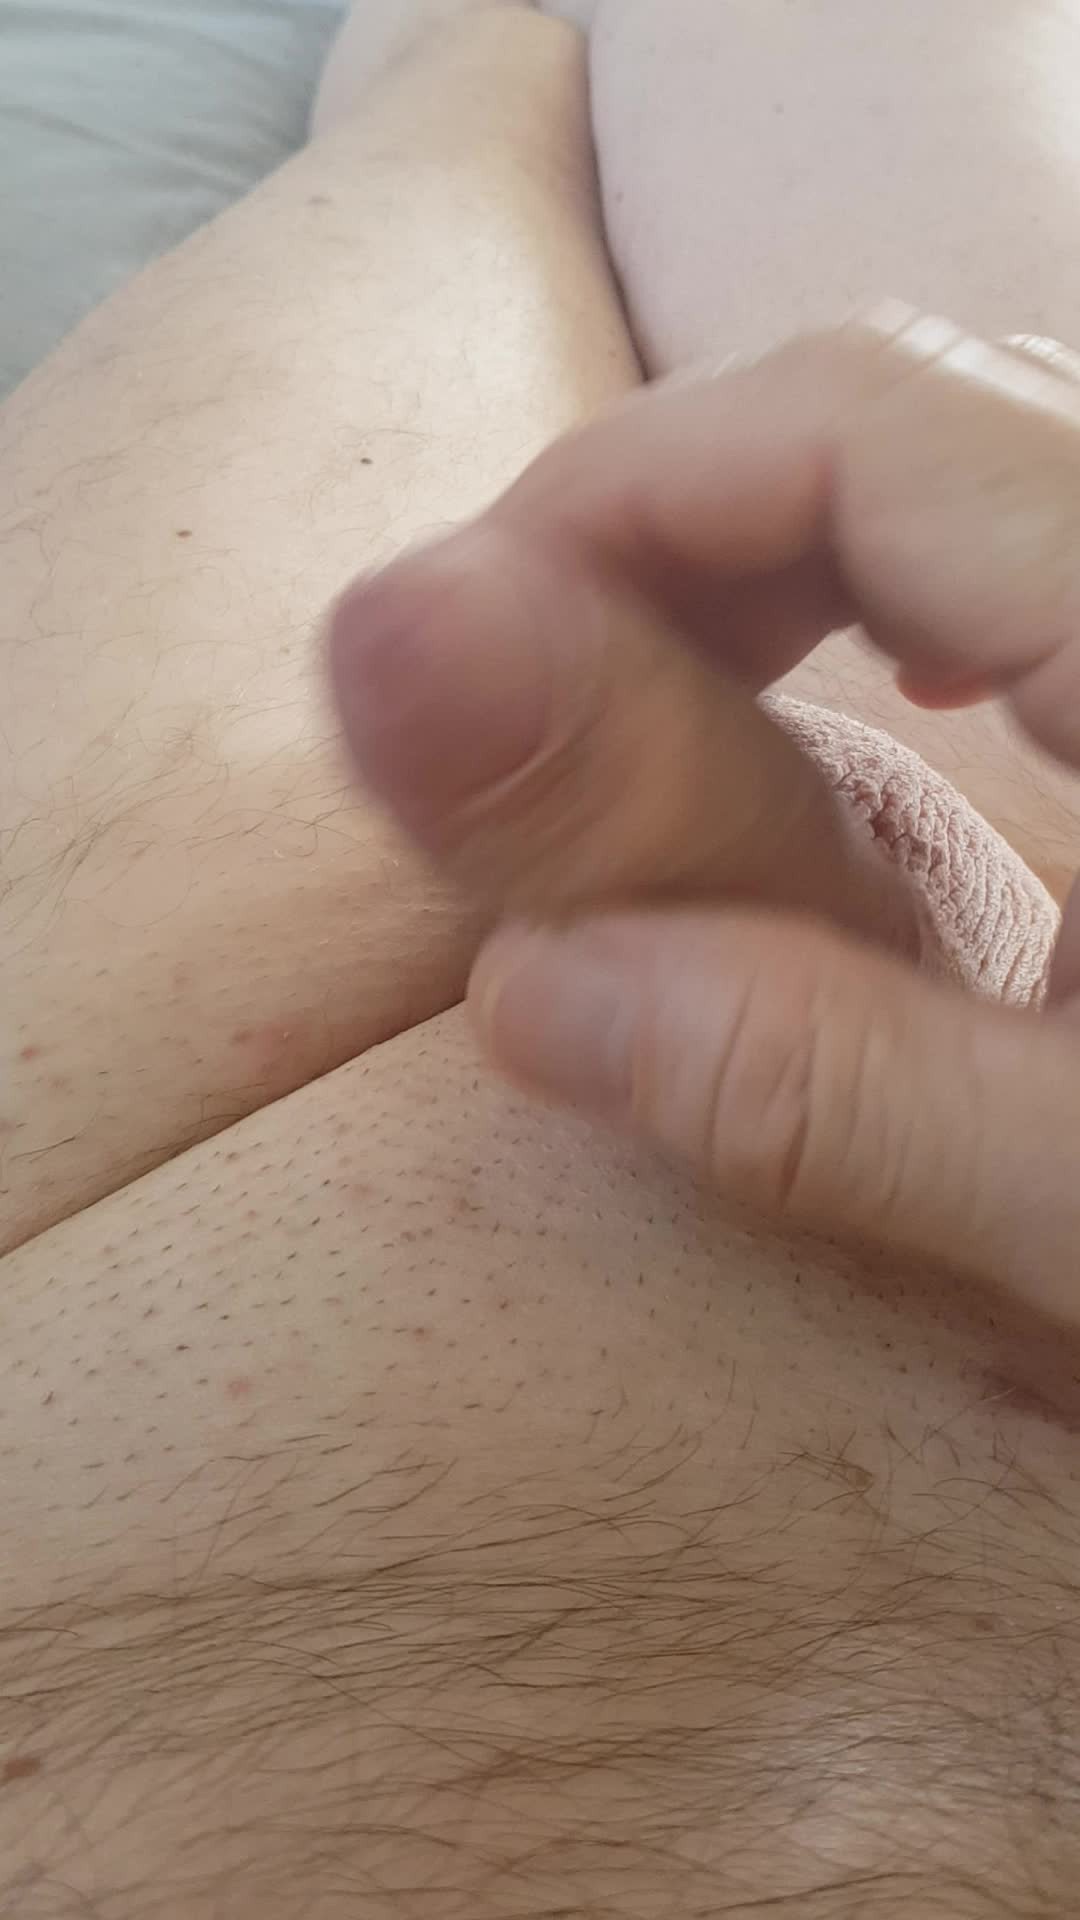 Video by Gaysteffe with the username @Gaysteffe,  April 30, 2021 at 6:26 AM. The post is about the topic Rate my pussy or dick and the text says '20210430_082510'